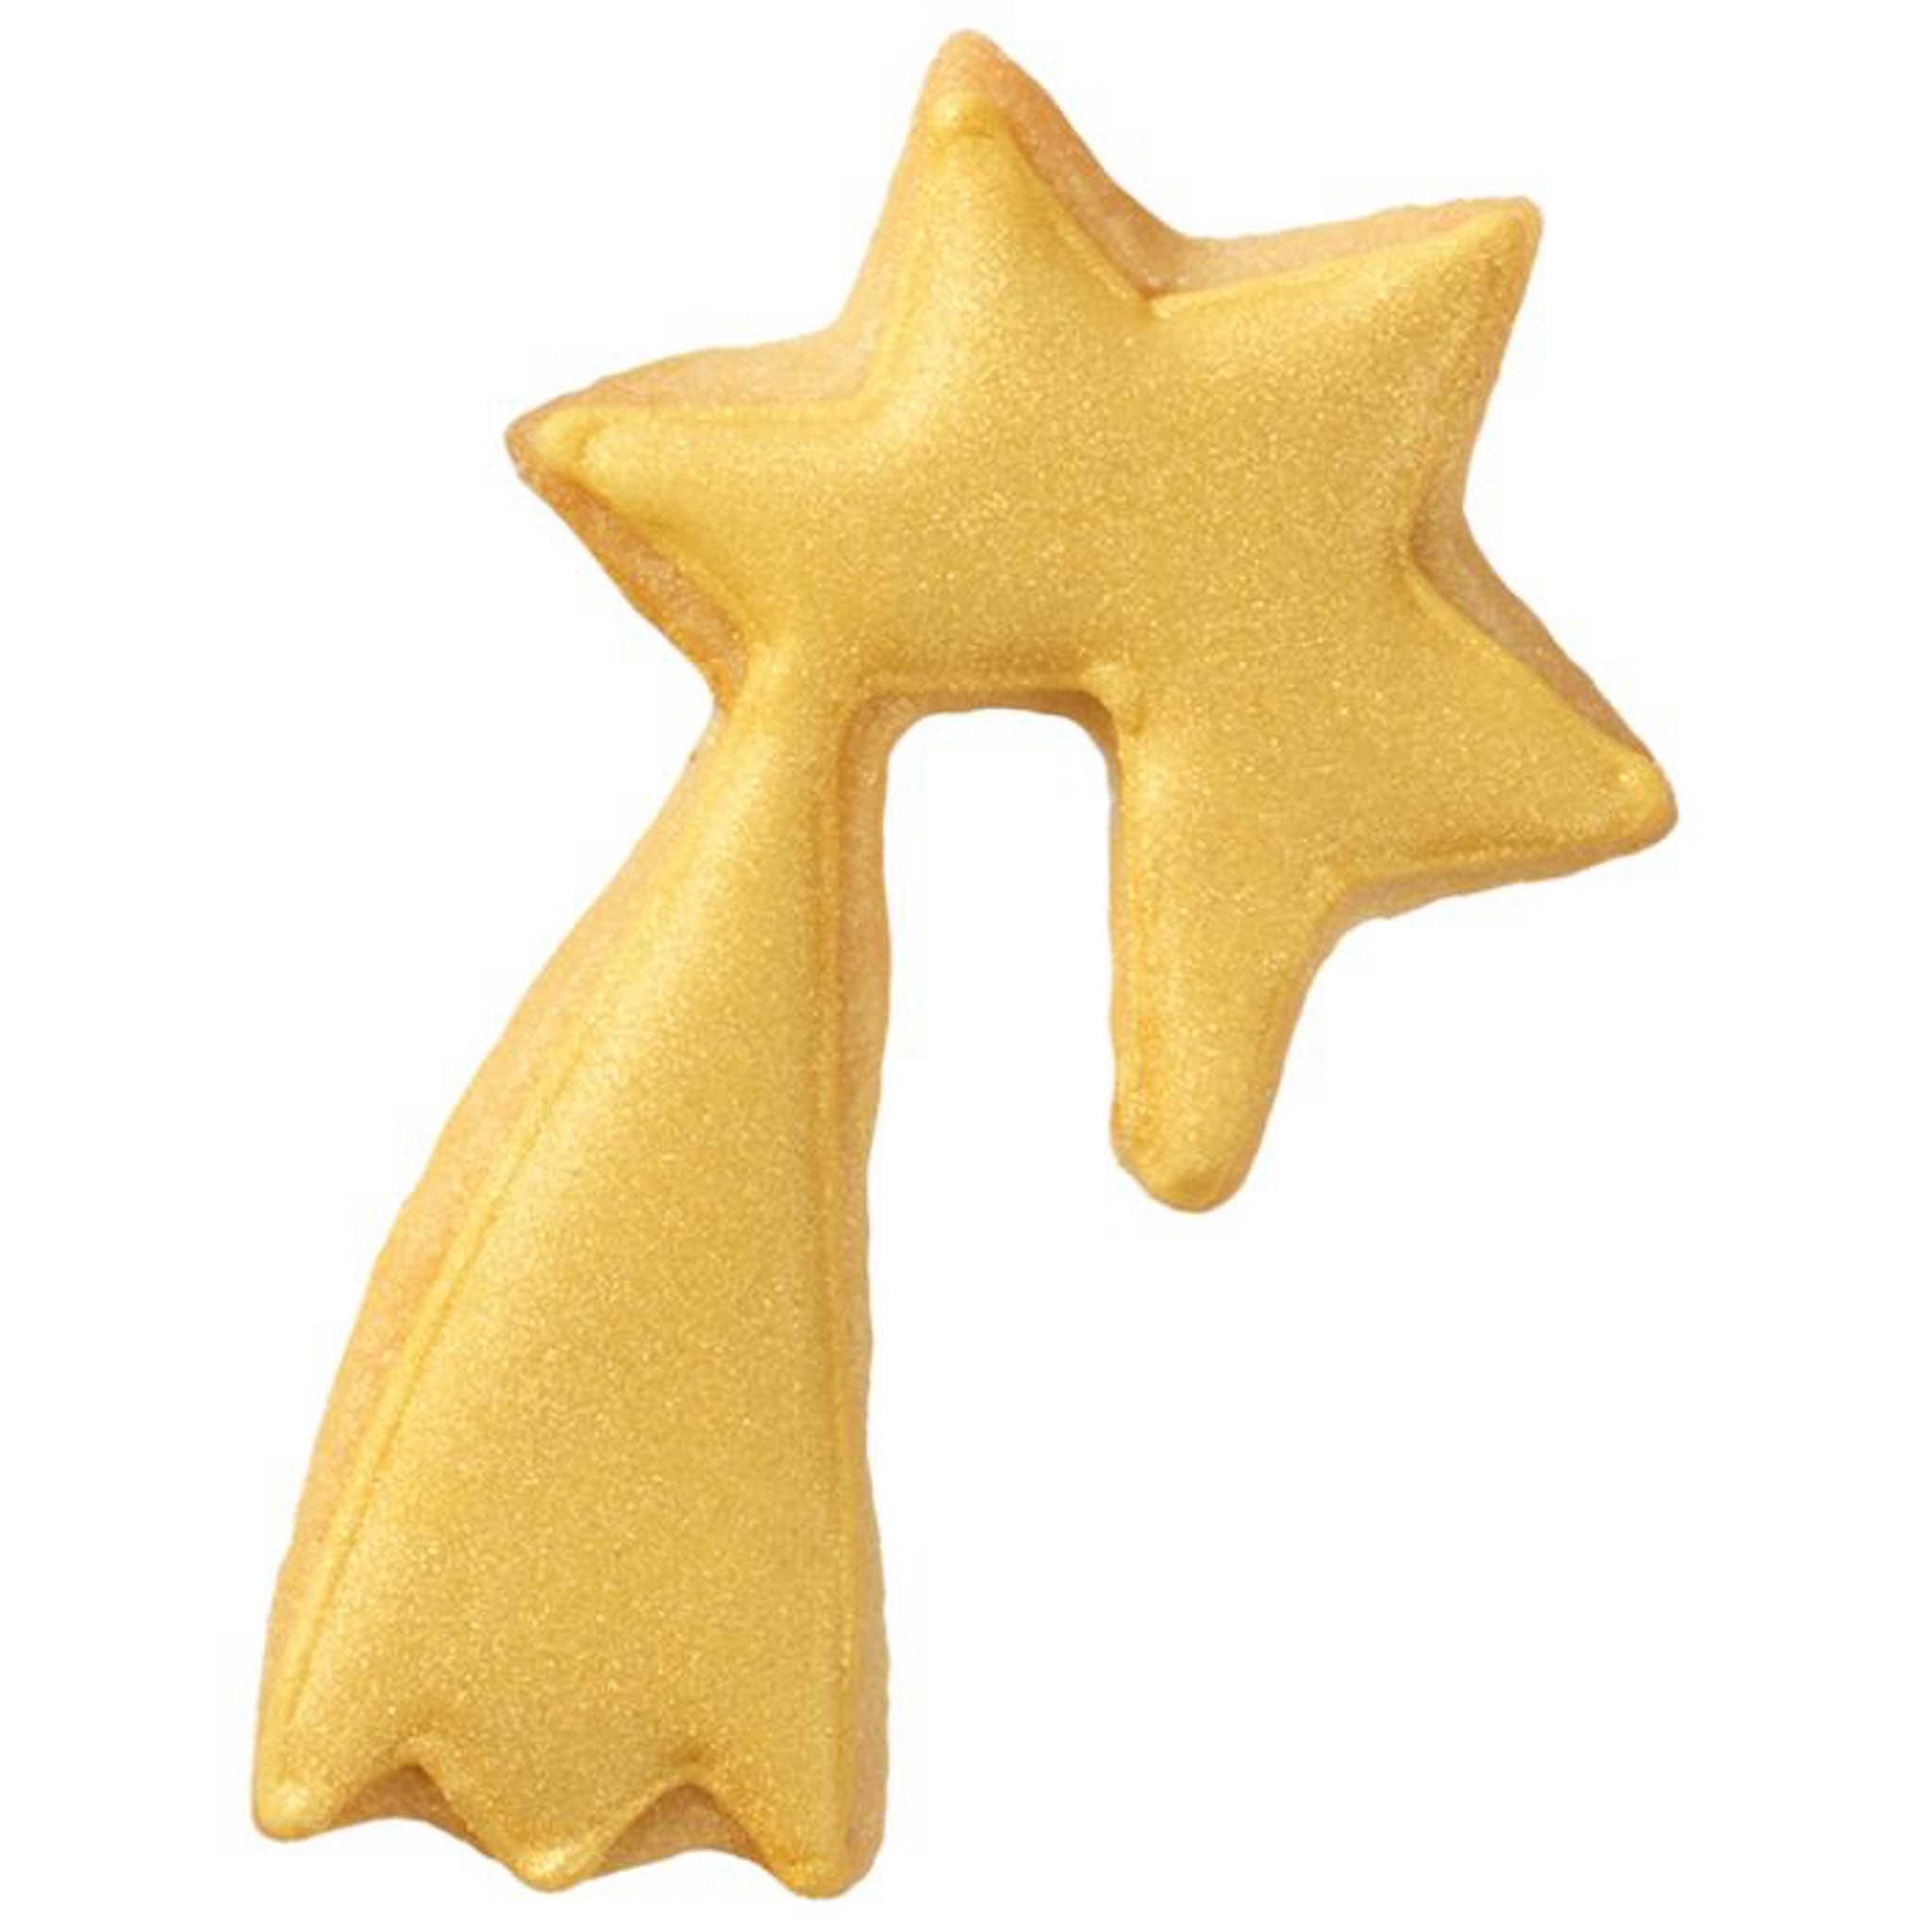 Stainless Steel 3D Shooting Star Cookie Cutter, 6.5cm